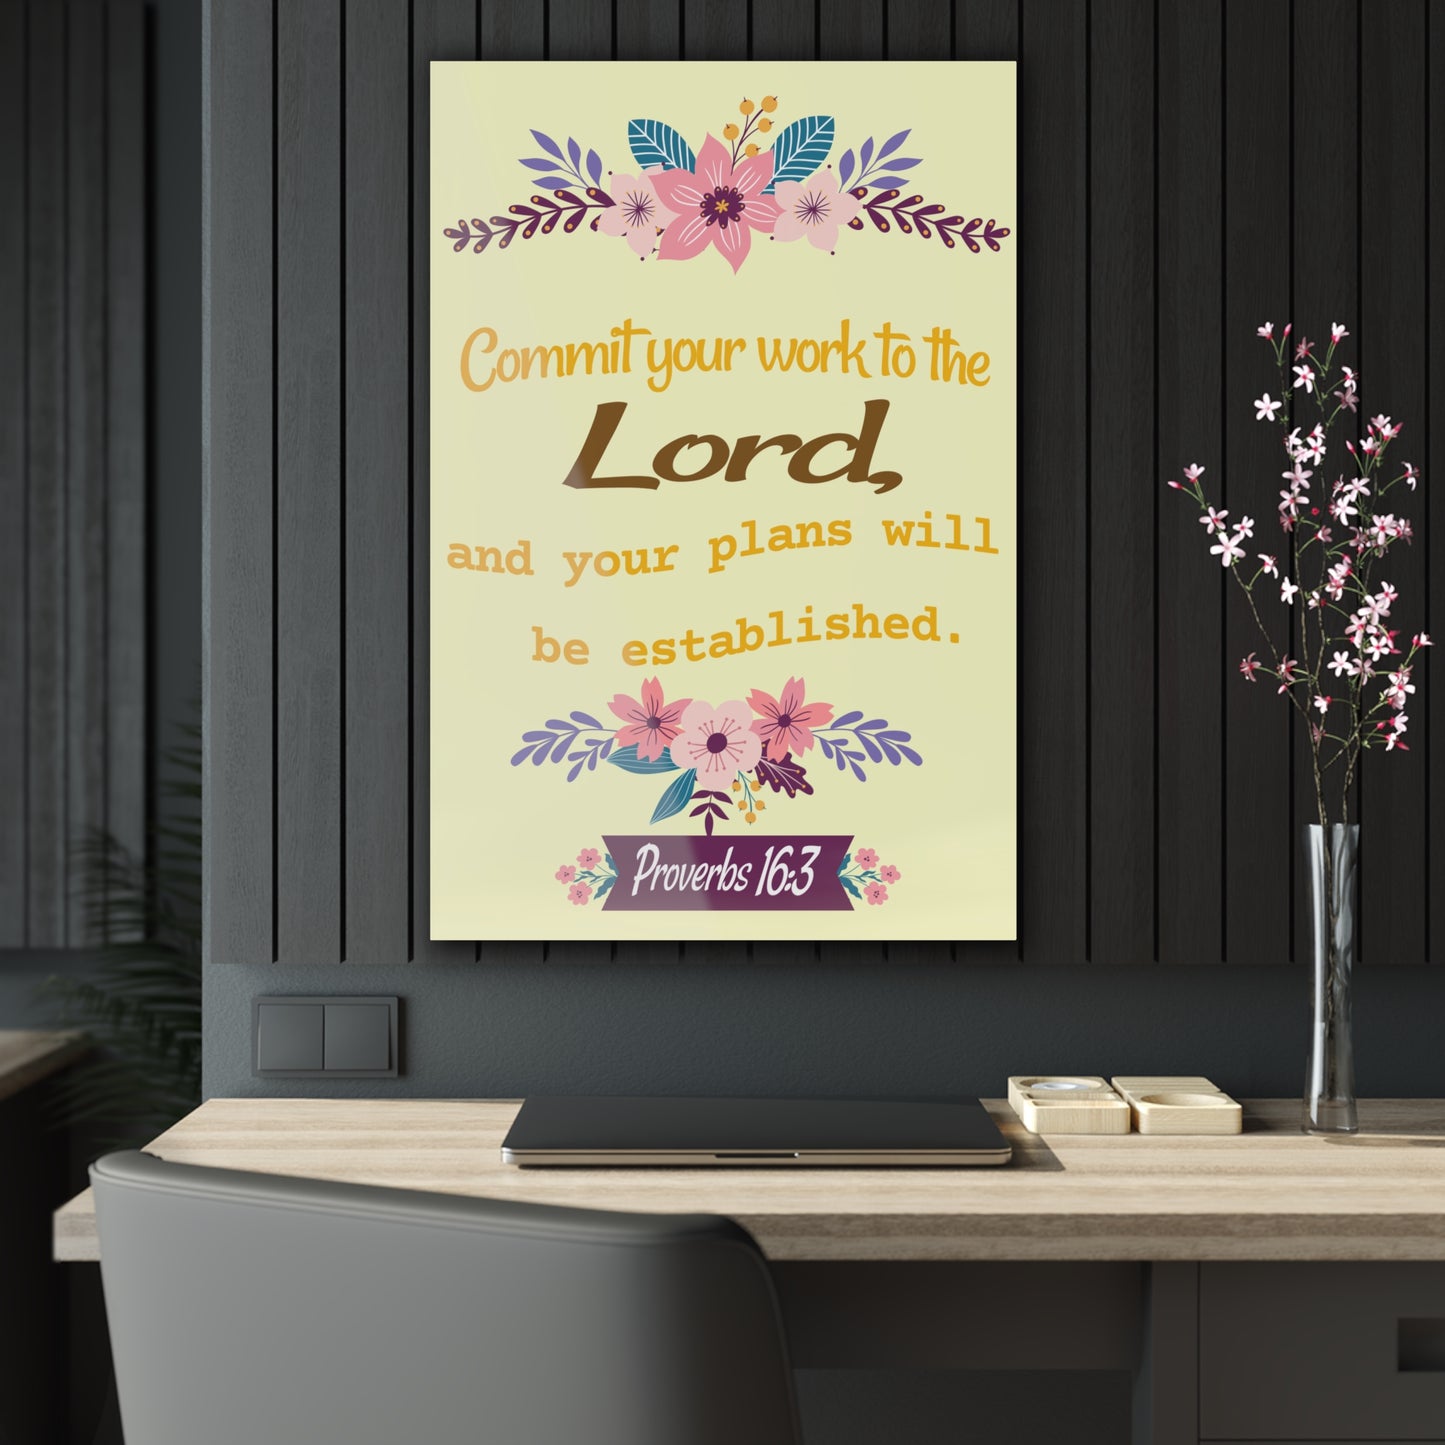 House Artwork - Acrylic Print with Inspirational Scripture | Art & Wall Decor,Assembled in the USA,Assembled in USA,Decor,Home & Living,Home Decor,Indoor,Made in the USA,Made in USA,Poster